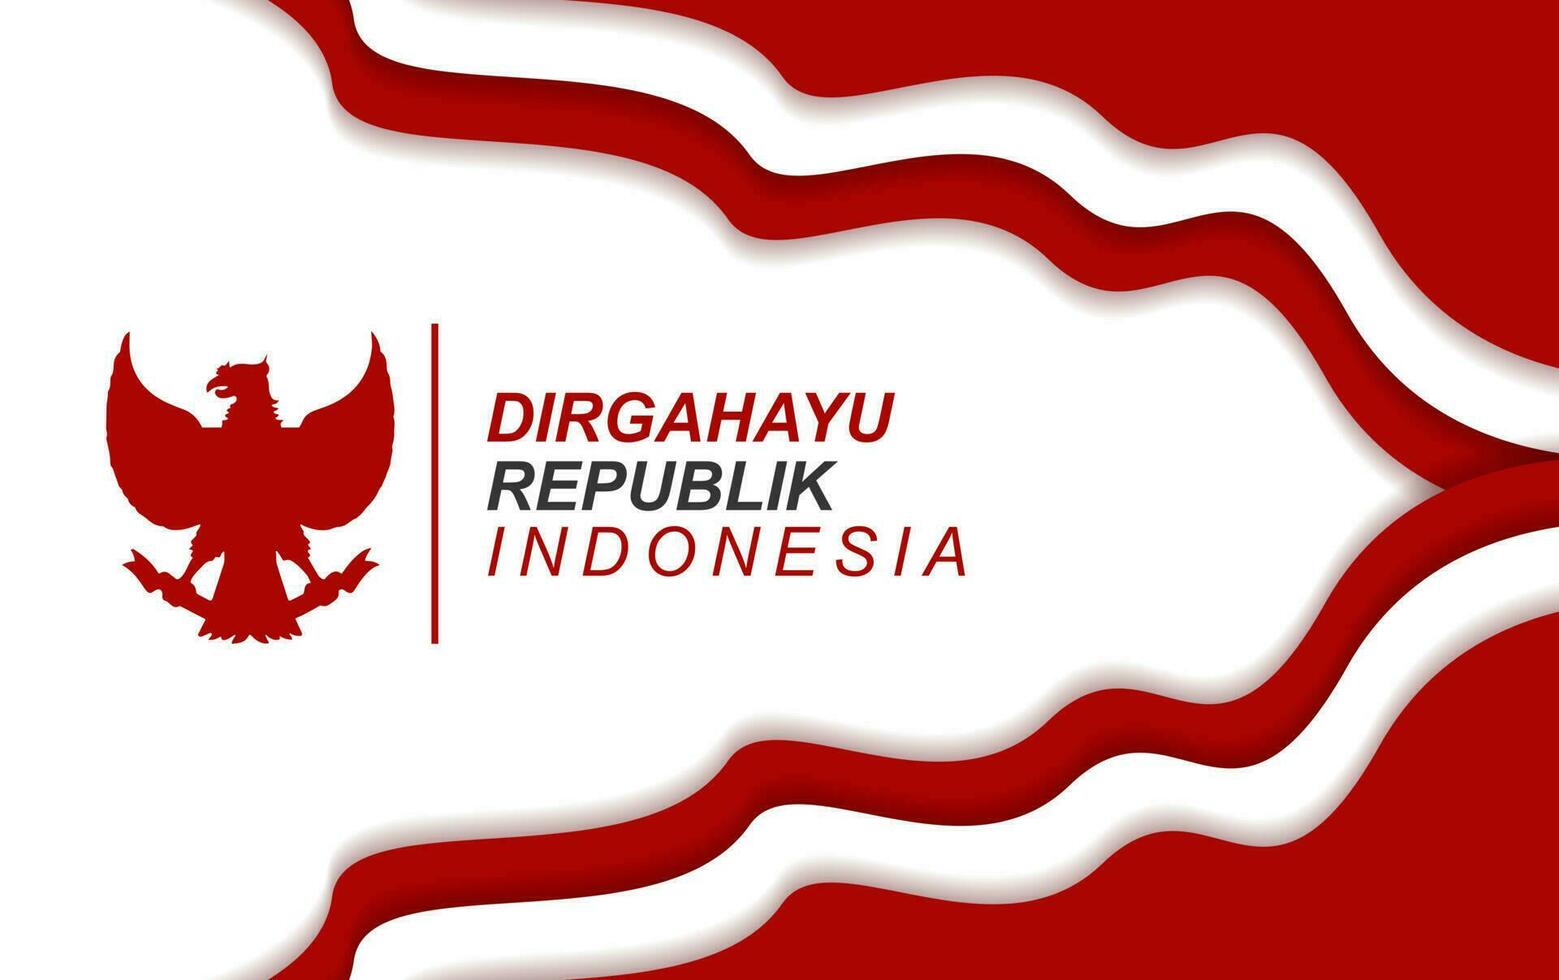 Indonesia independence day 17th august, greeting card design banner vector